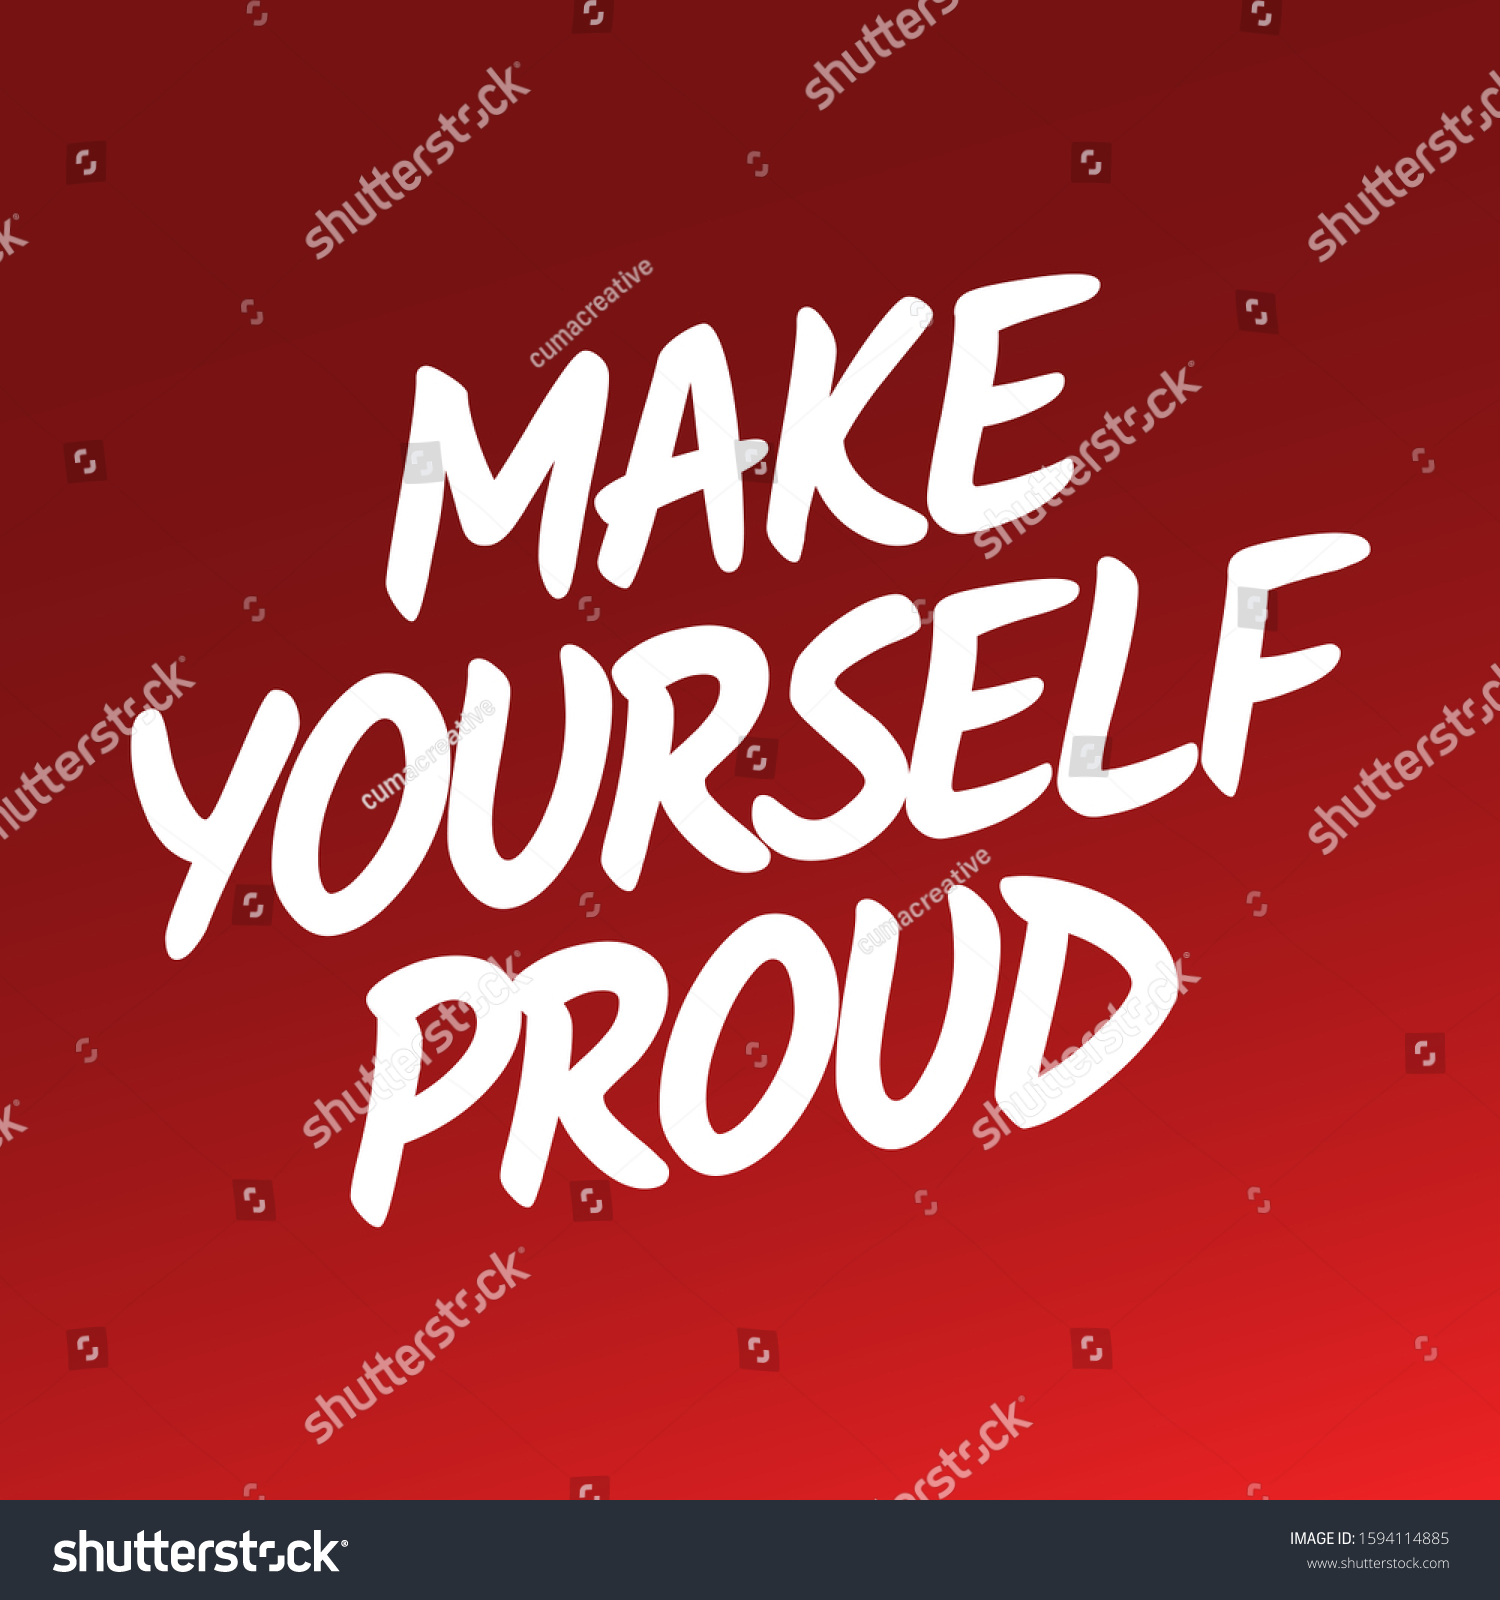 Believe in yourself quotes - Make yourself proud #1594114885